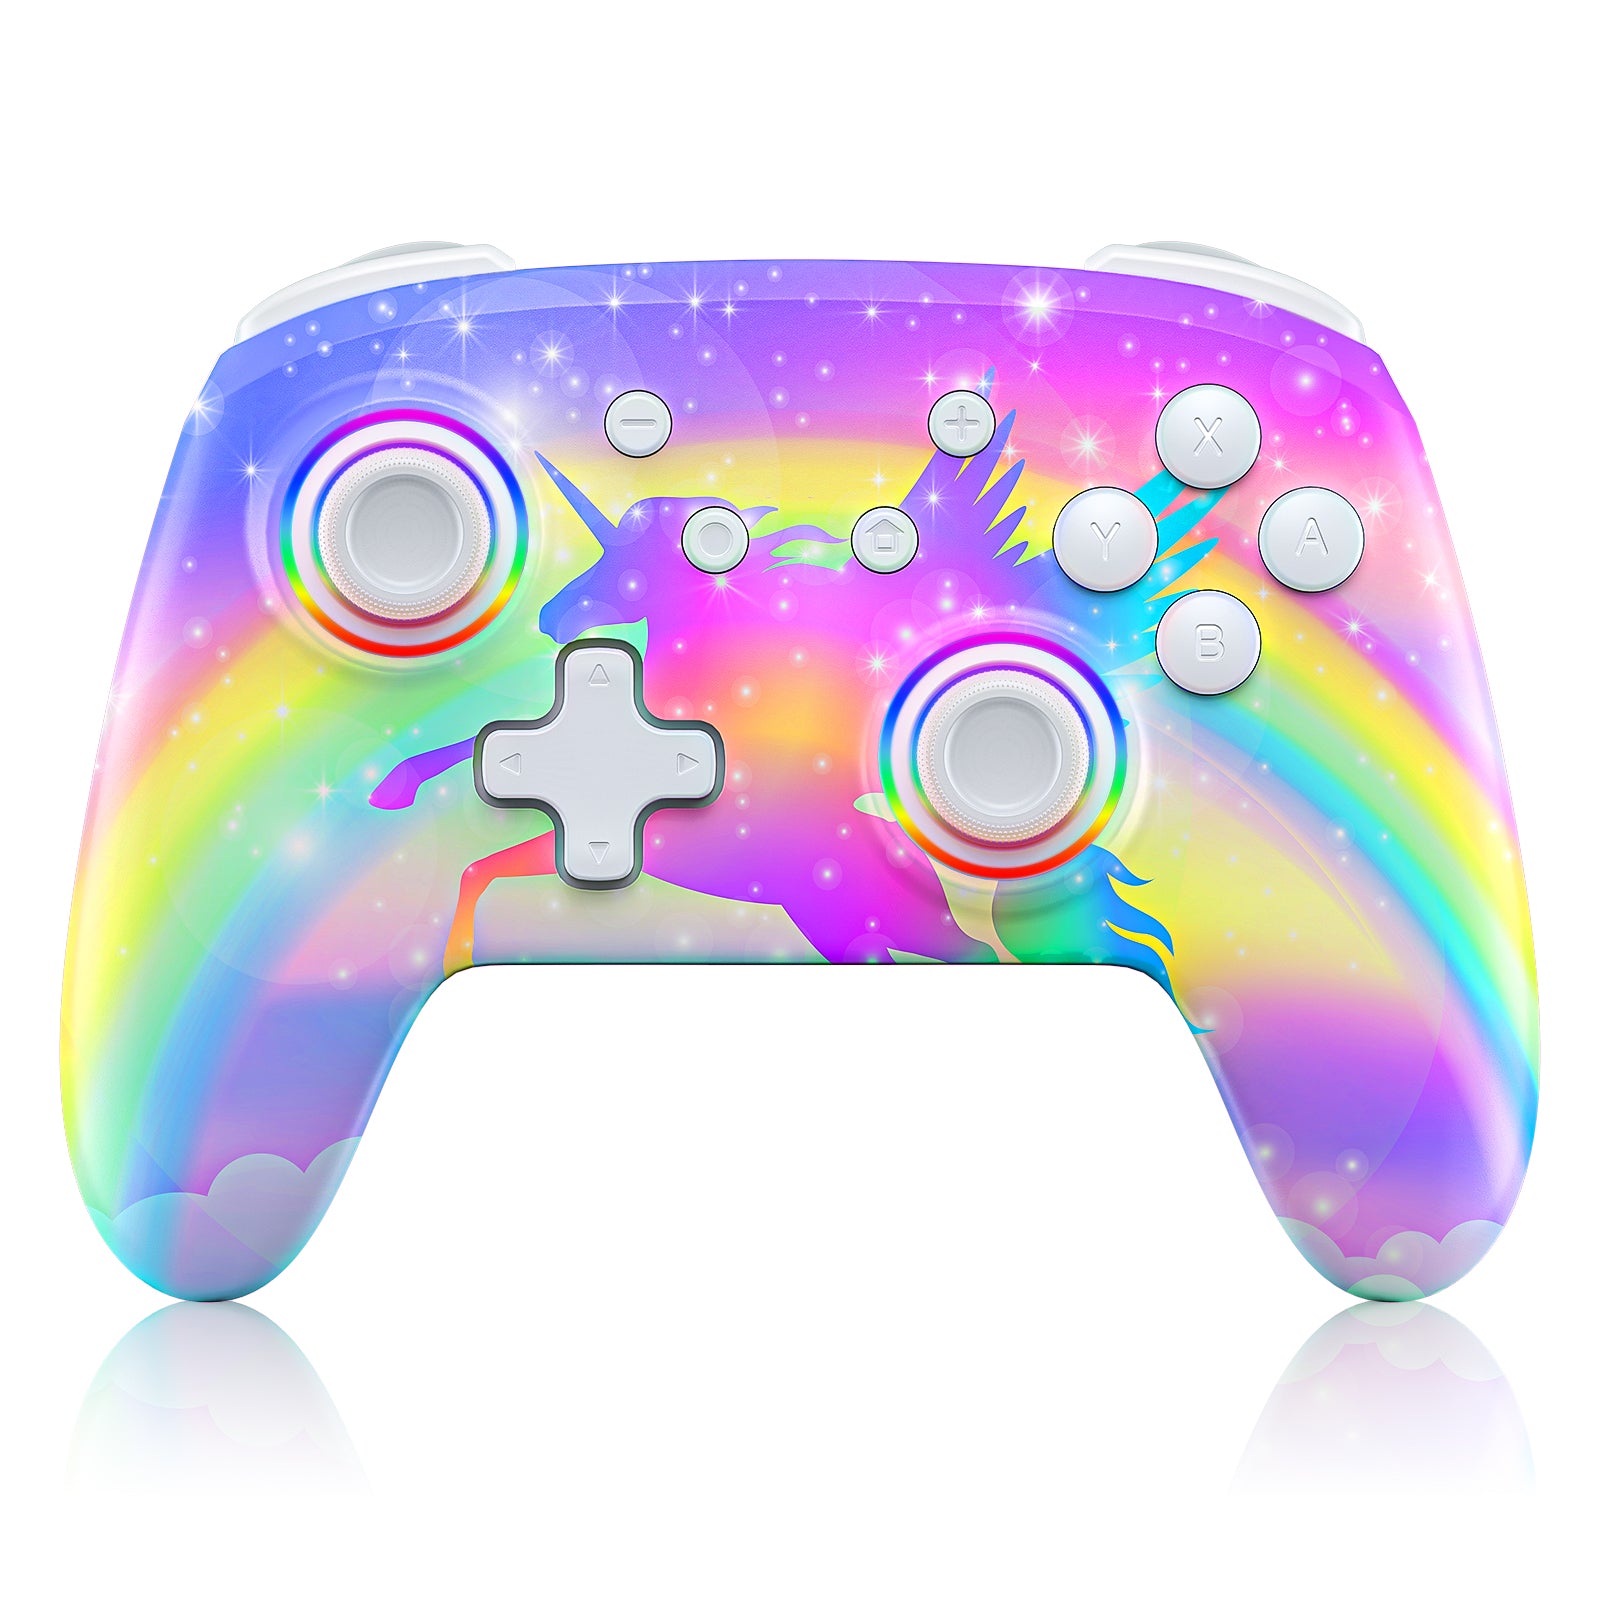 The image showcases a pink unicorn skin on the Bluetooth controller.